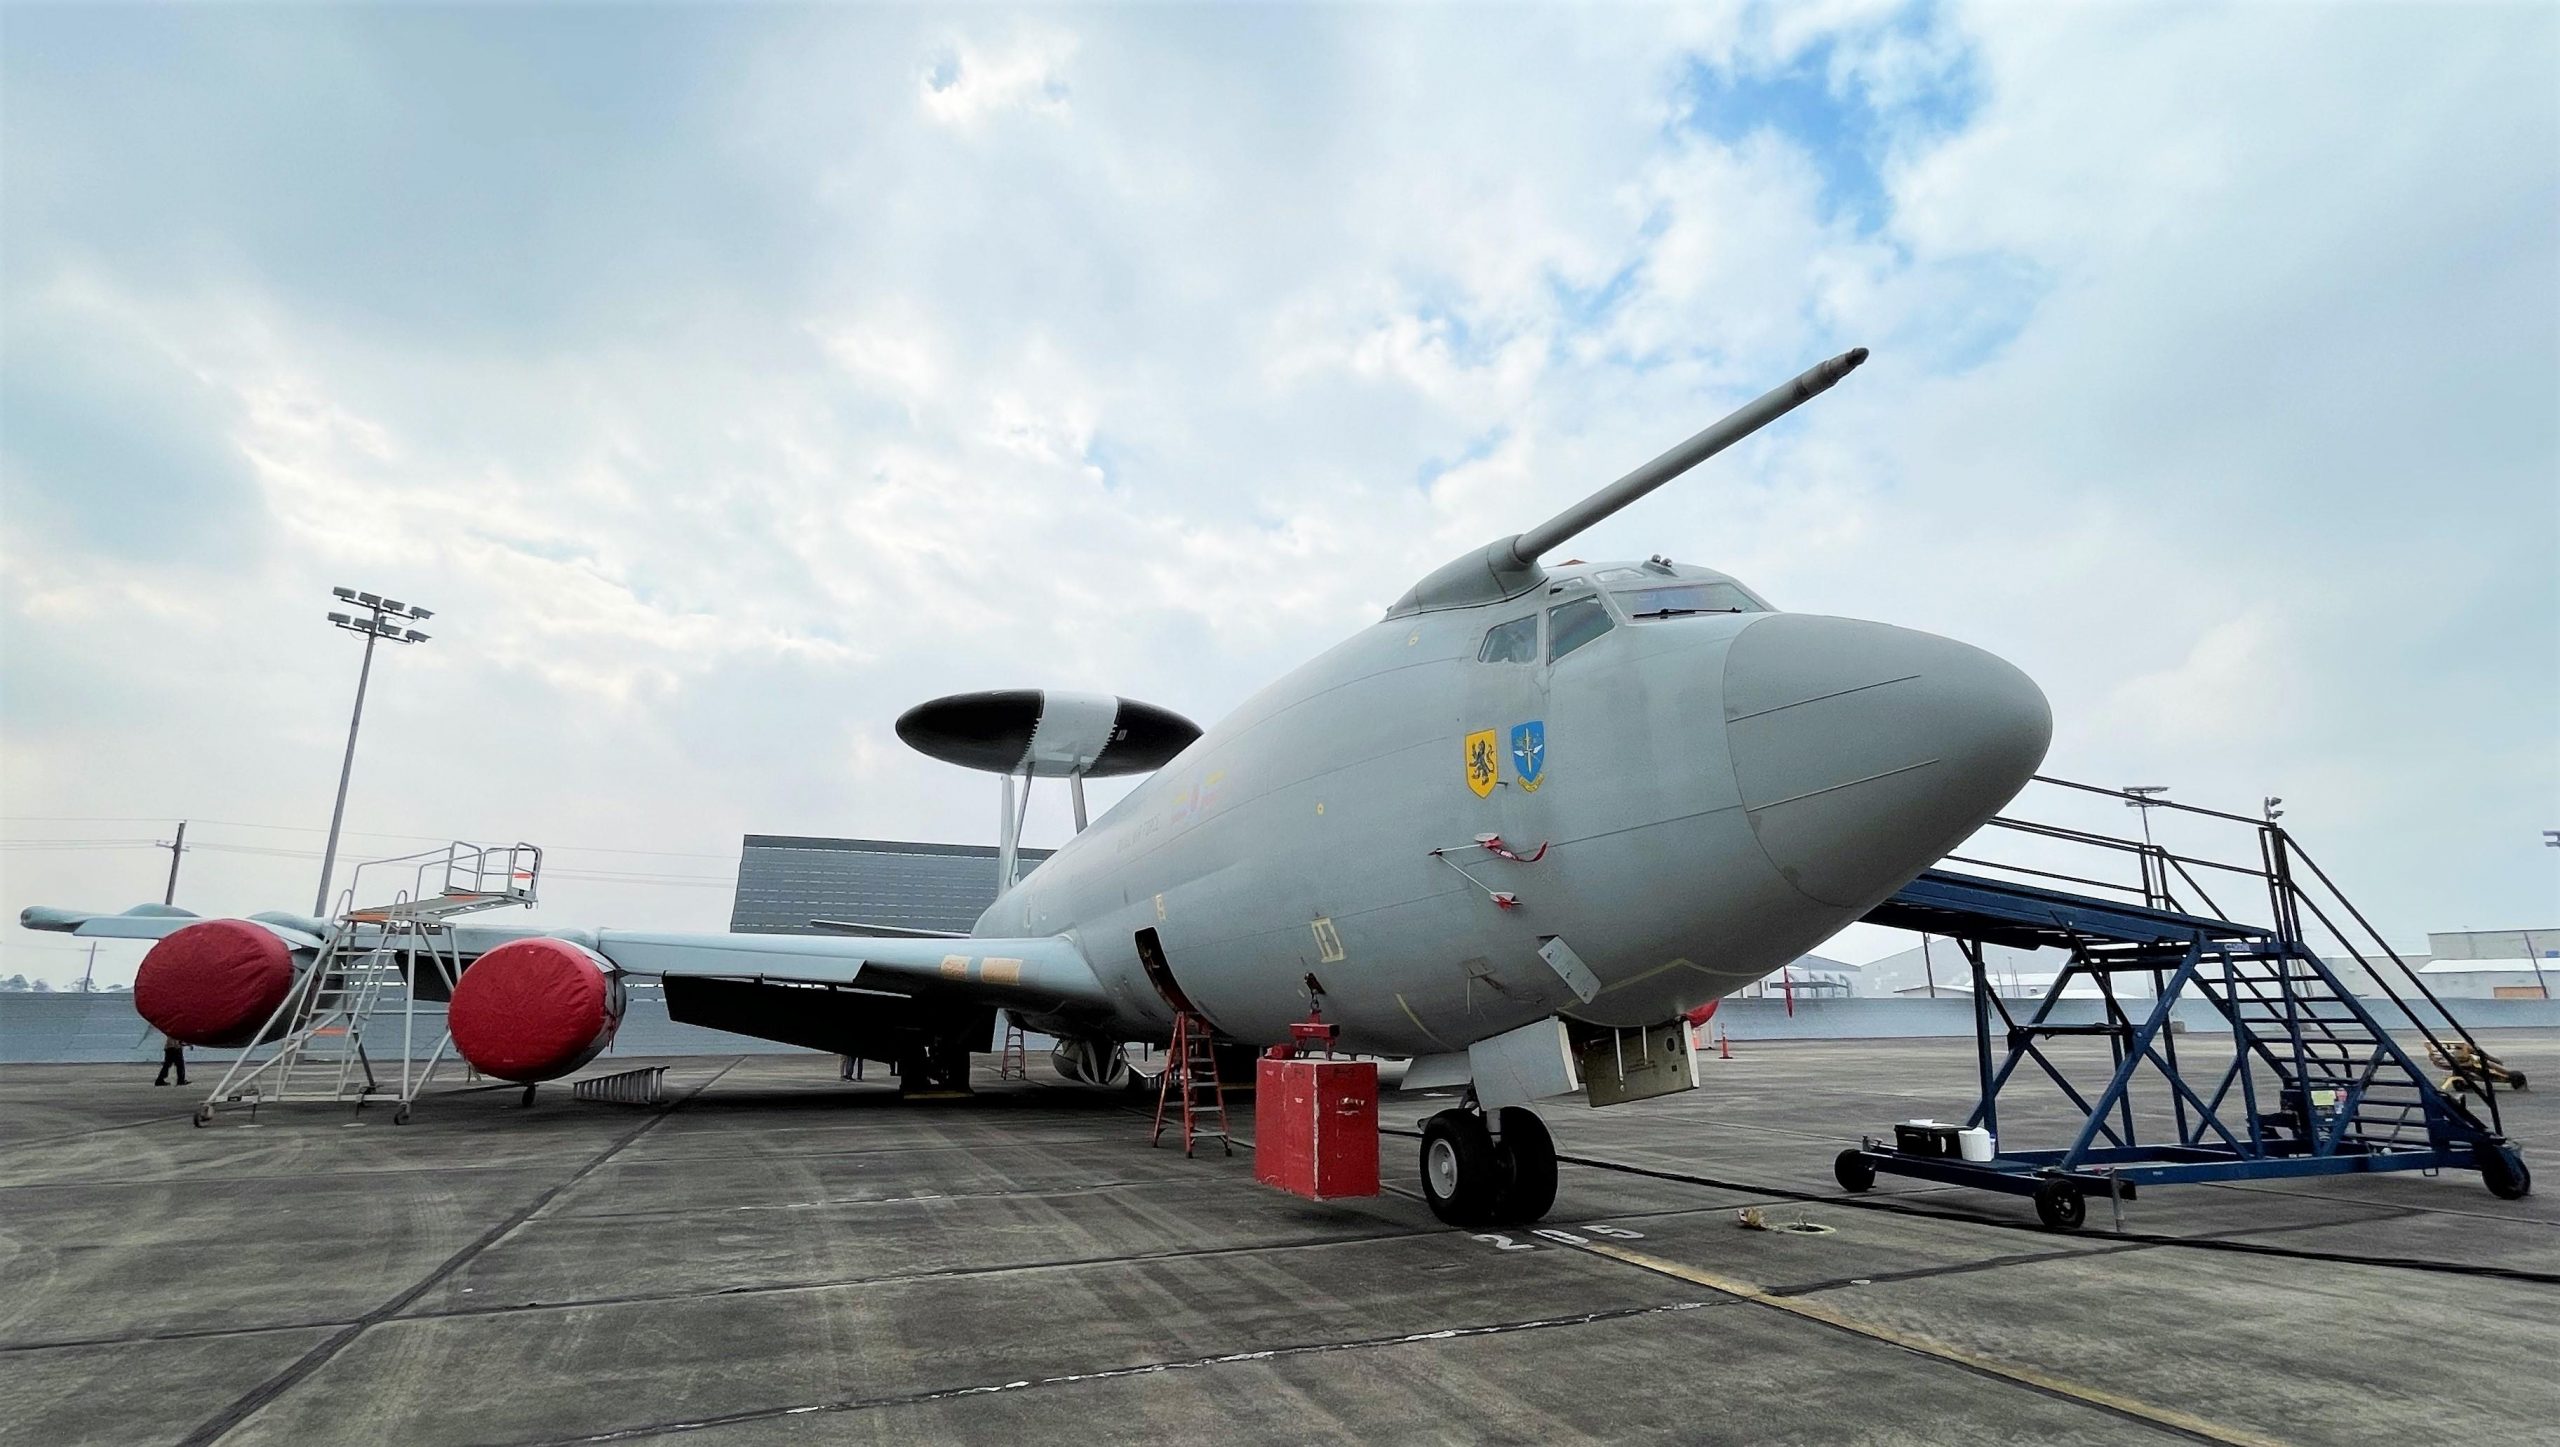 US Navy Acquires Boeing E-3 Sentry from Royal Air Force as Trainer for E-6B Mercury Fleet